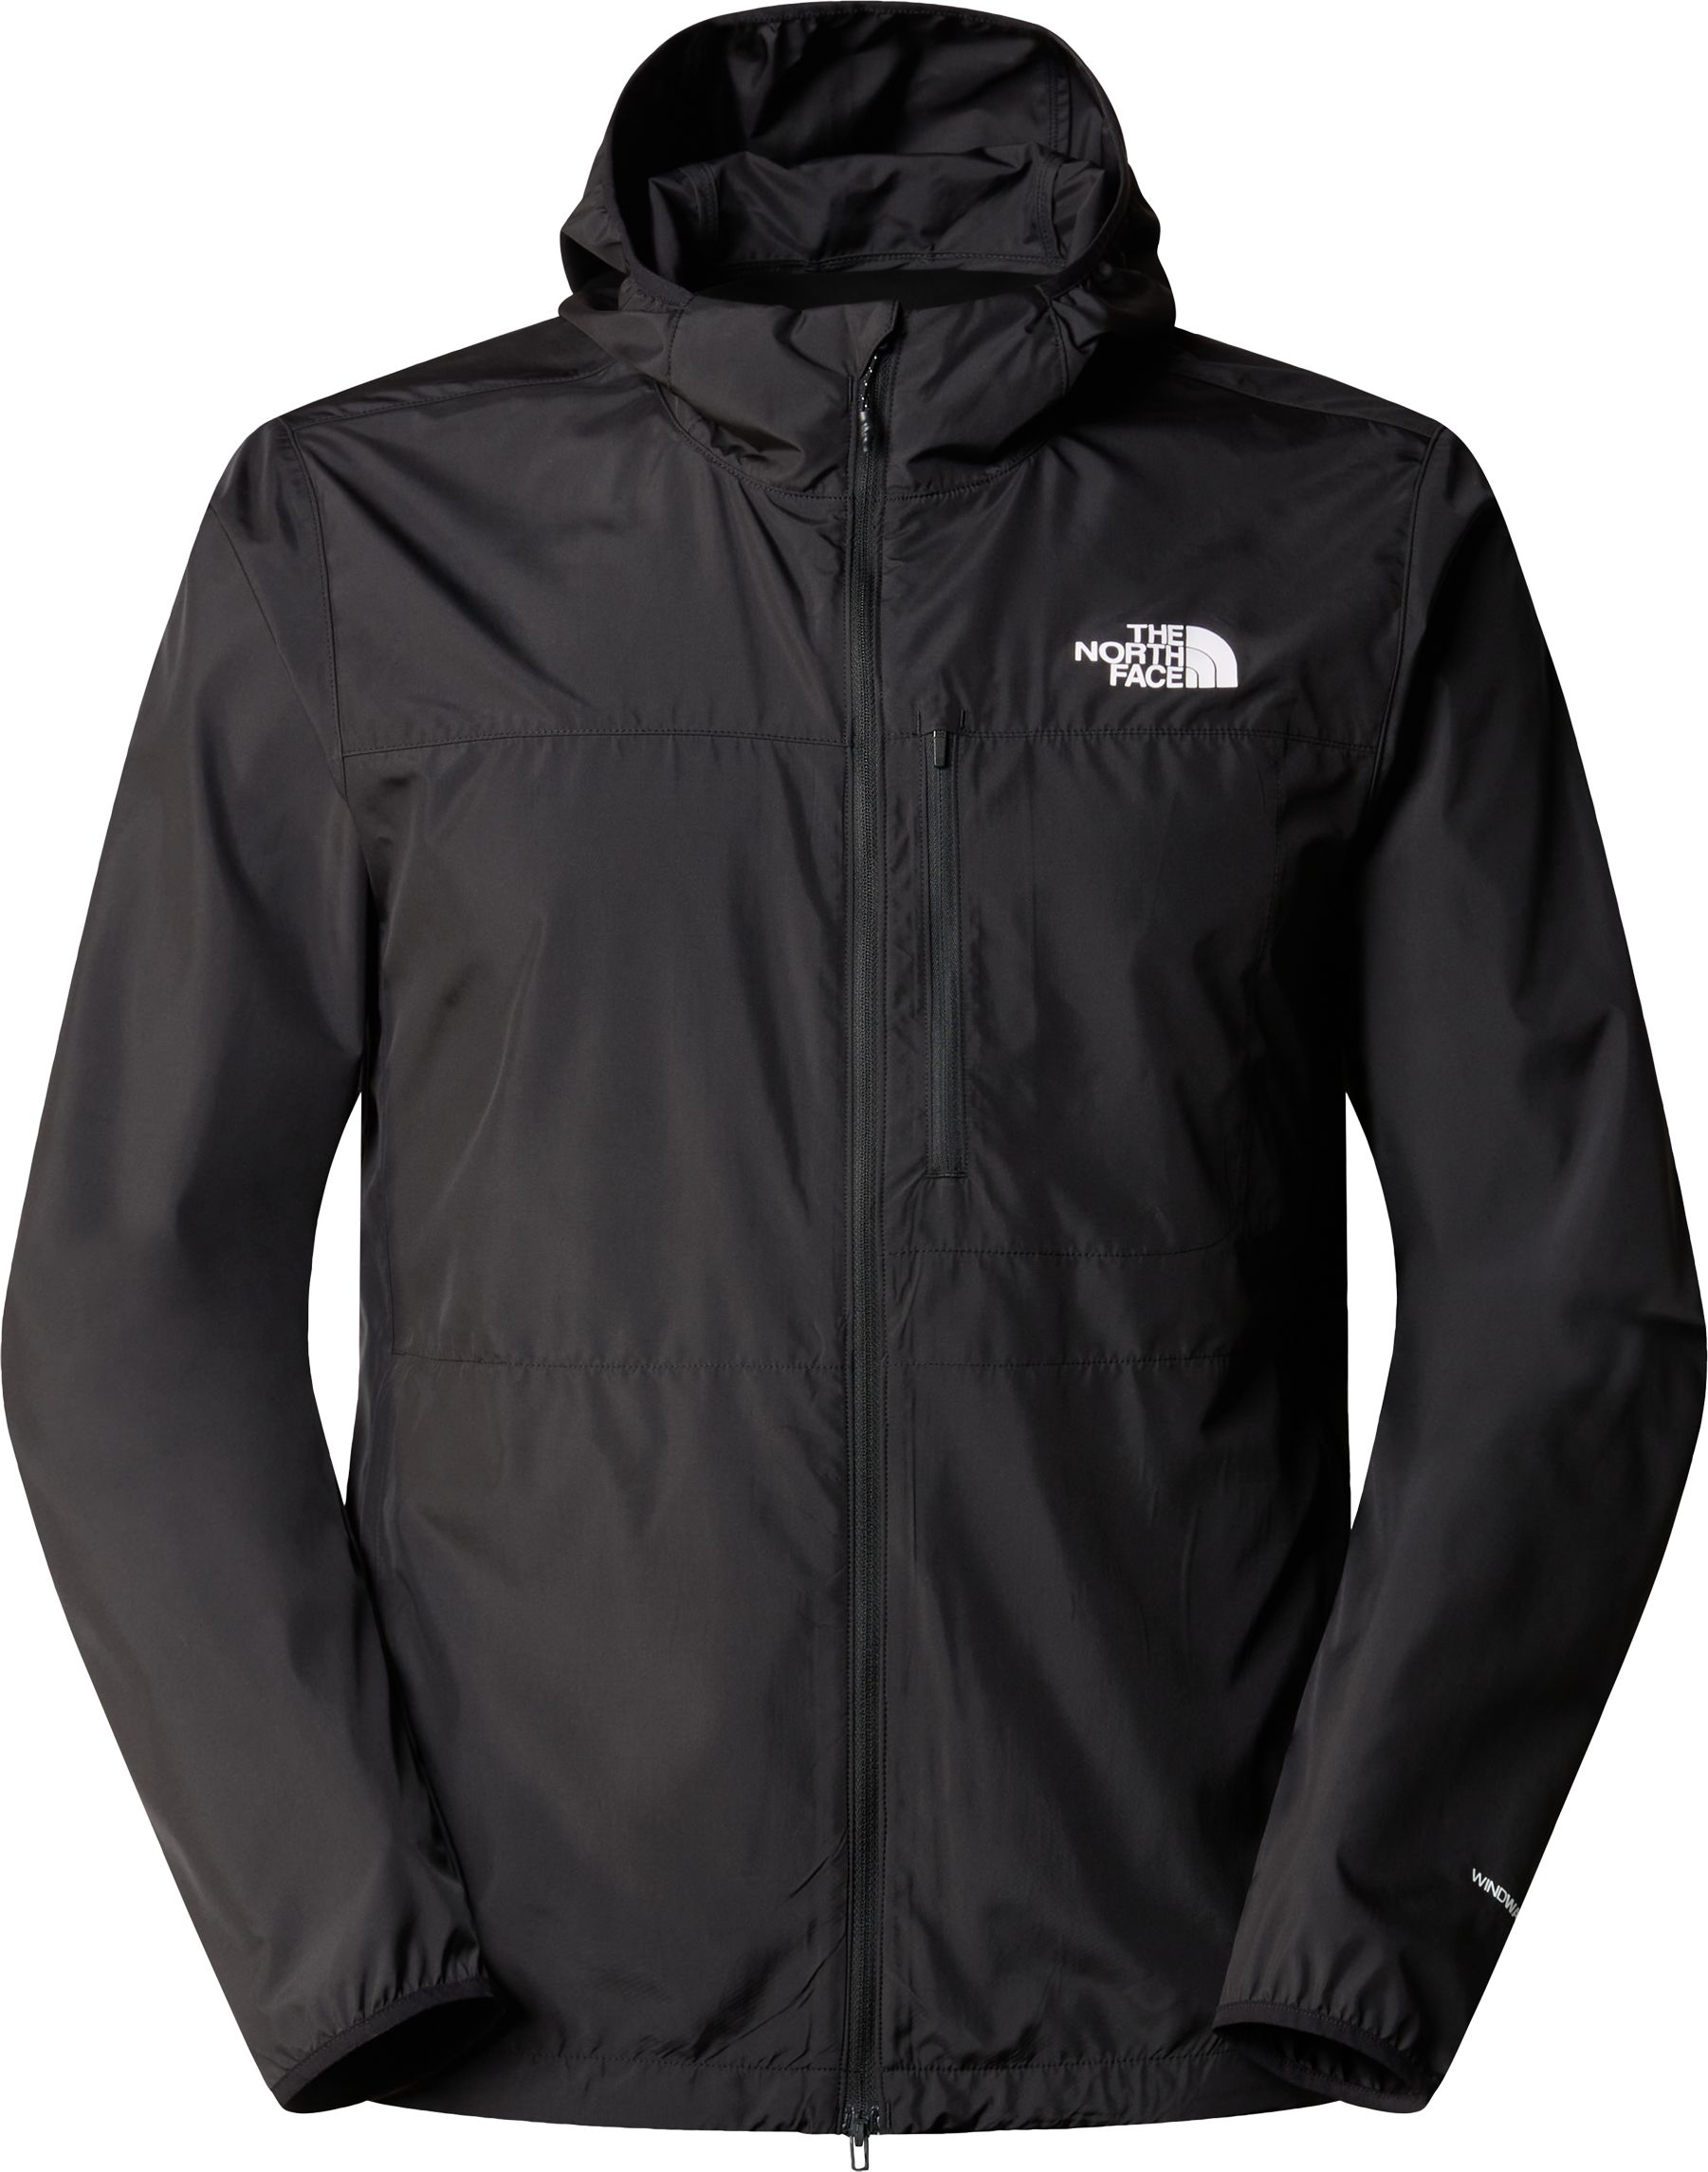 THE NORTH FACE, M HIGHER RUN WIND JACKET